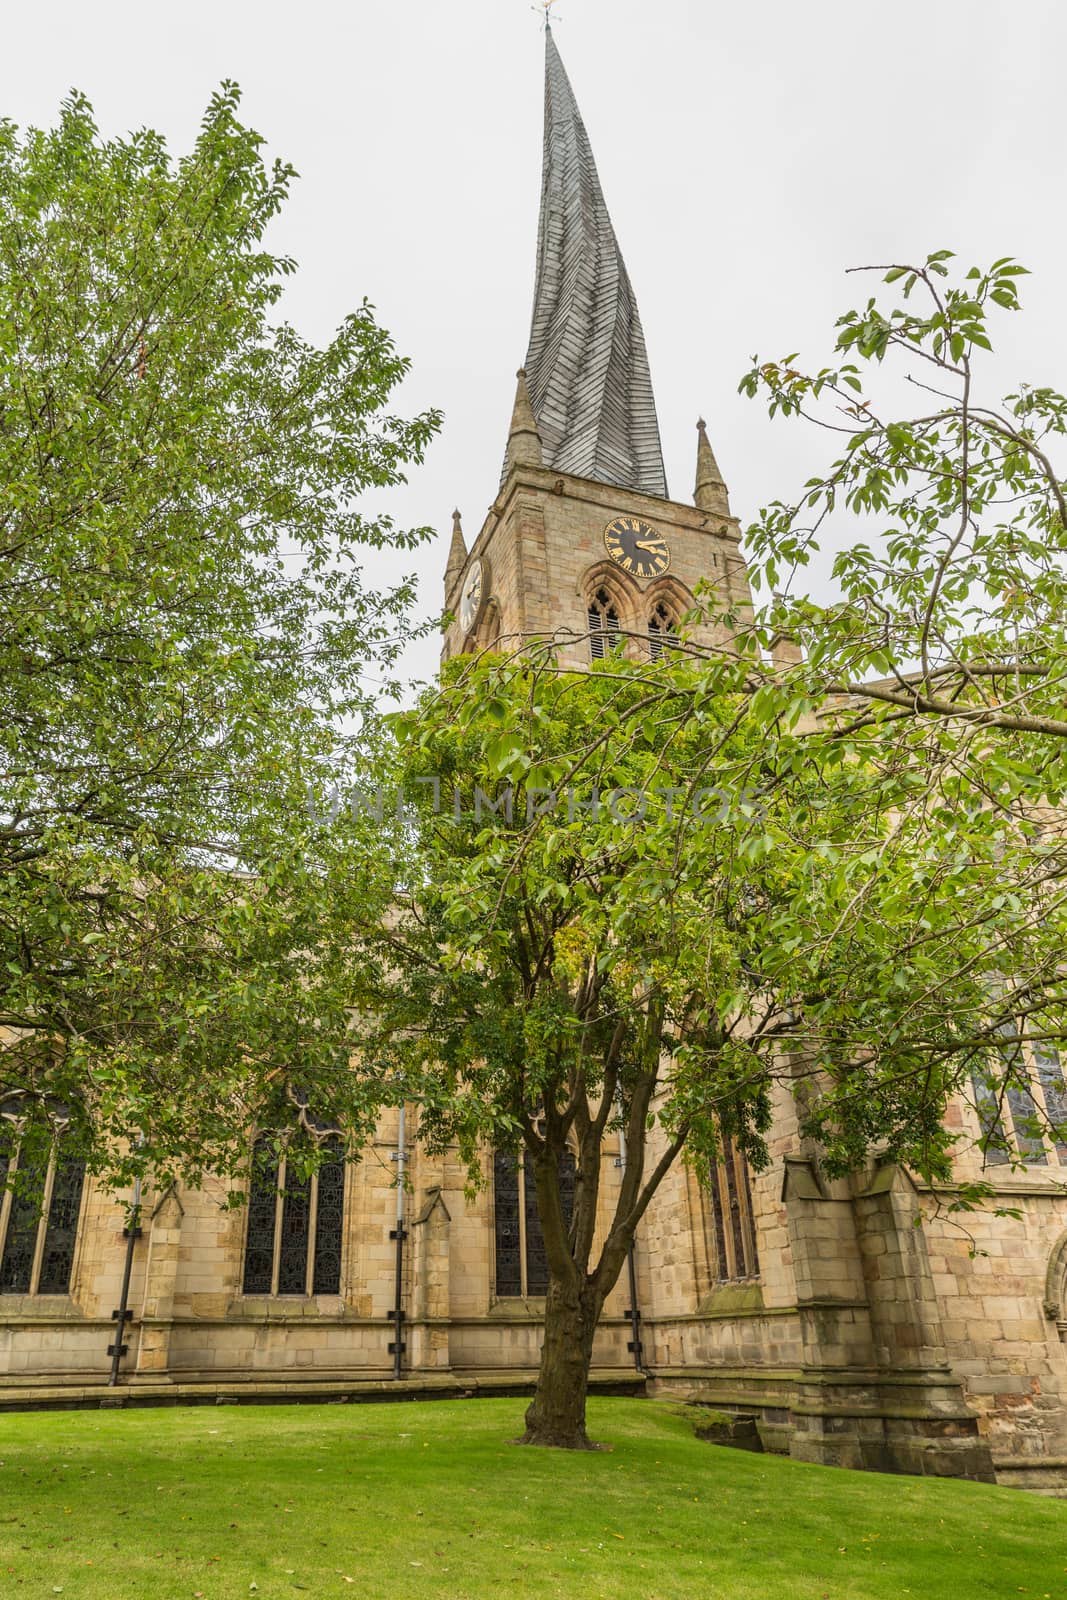 Chesterfield Church (Saint Mary and All Saints) is in the town of Chesterfield in Derbyshire, England. It is most known for its twisted spire, an architectural phenomenon, The Crooked Spire.